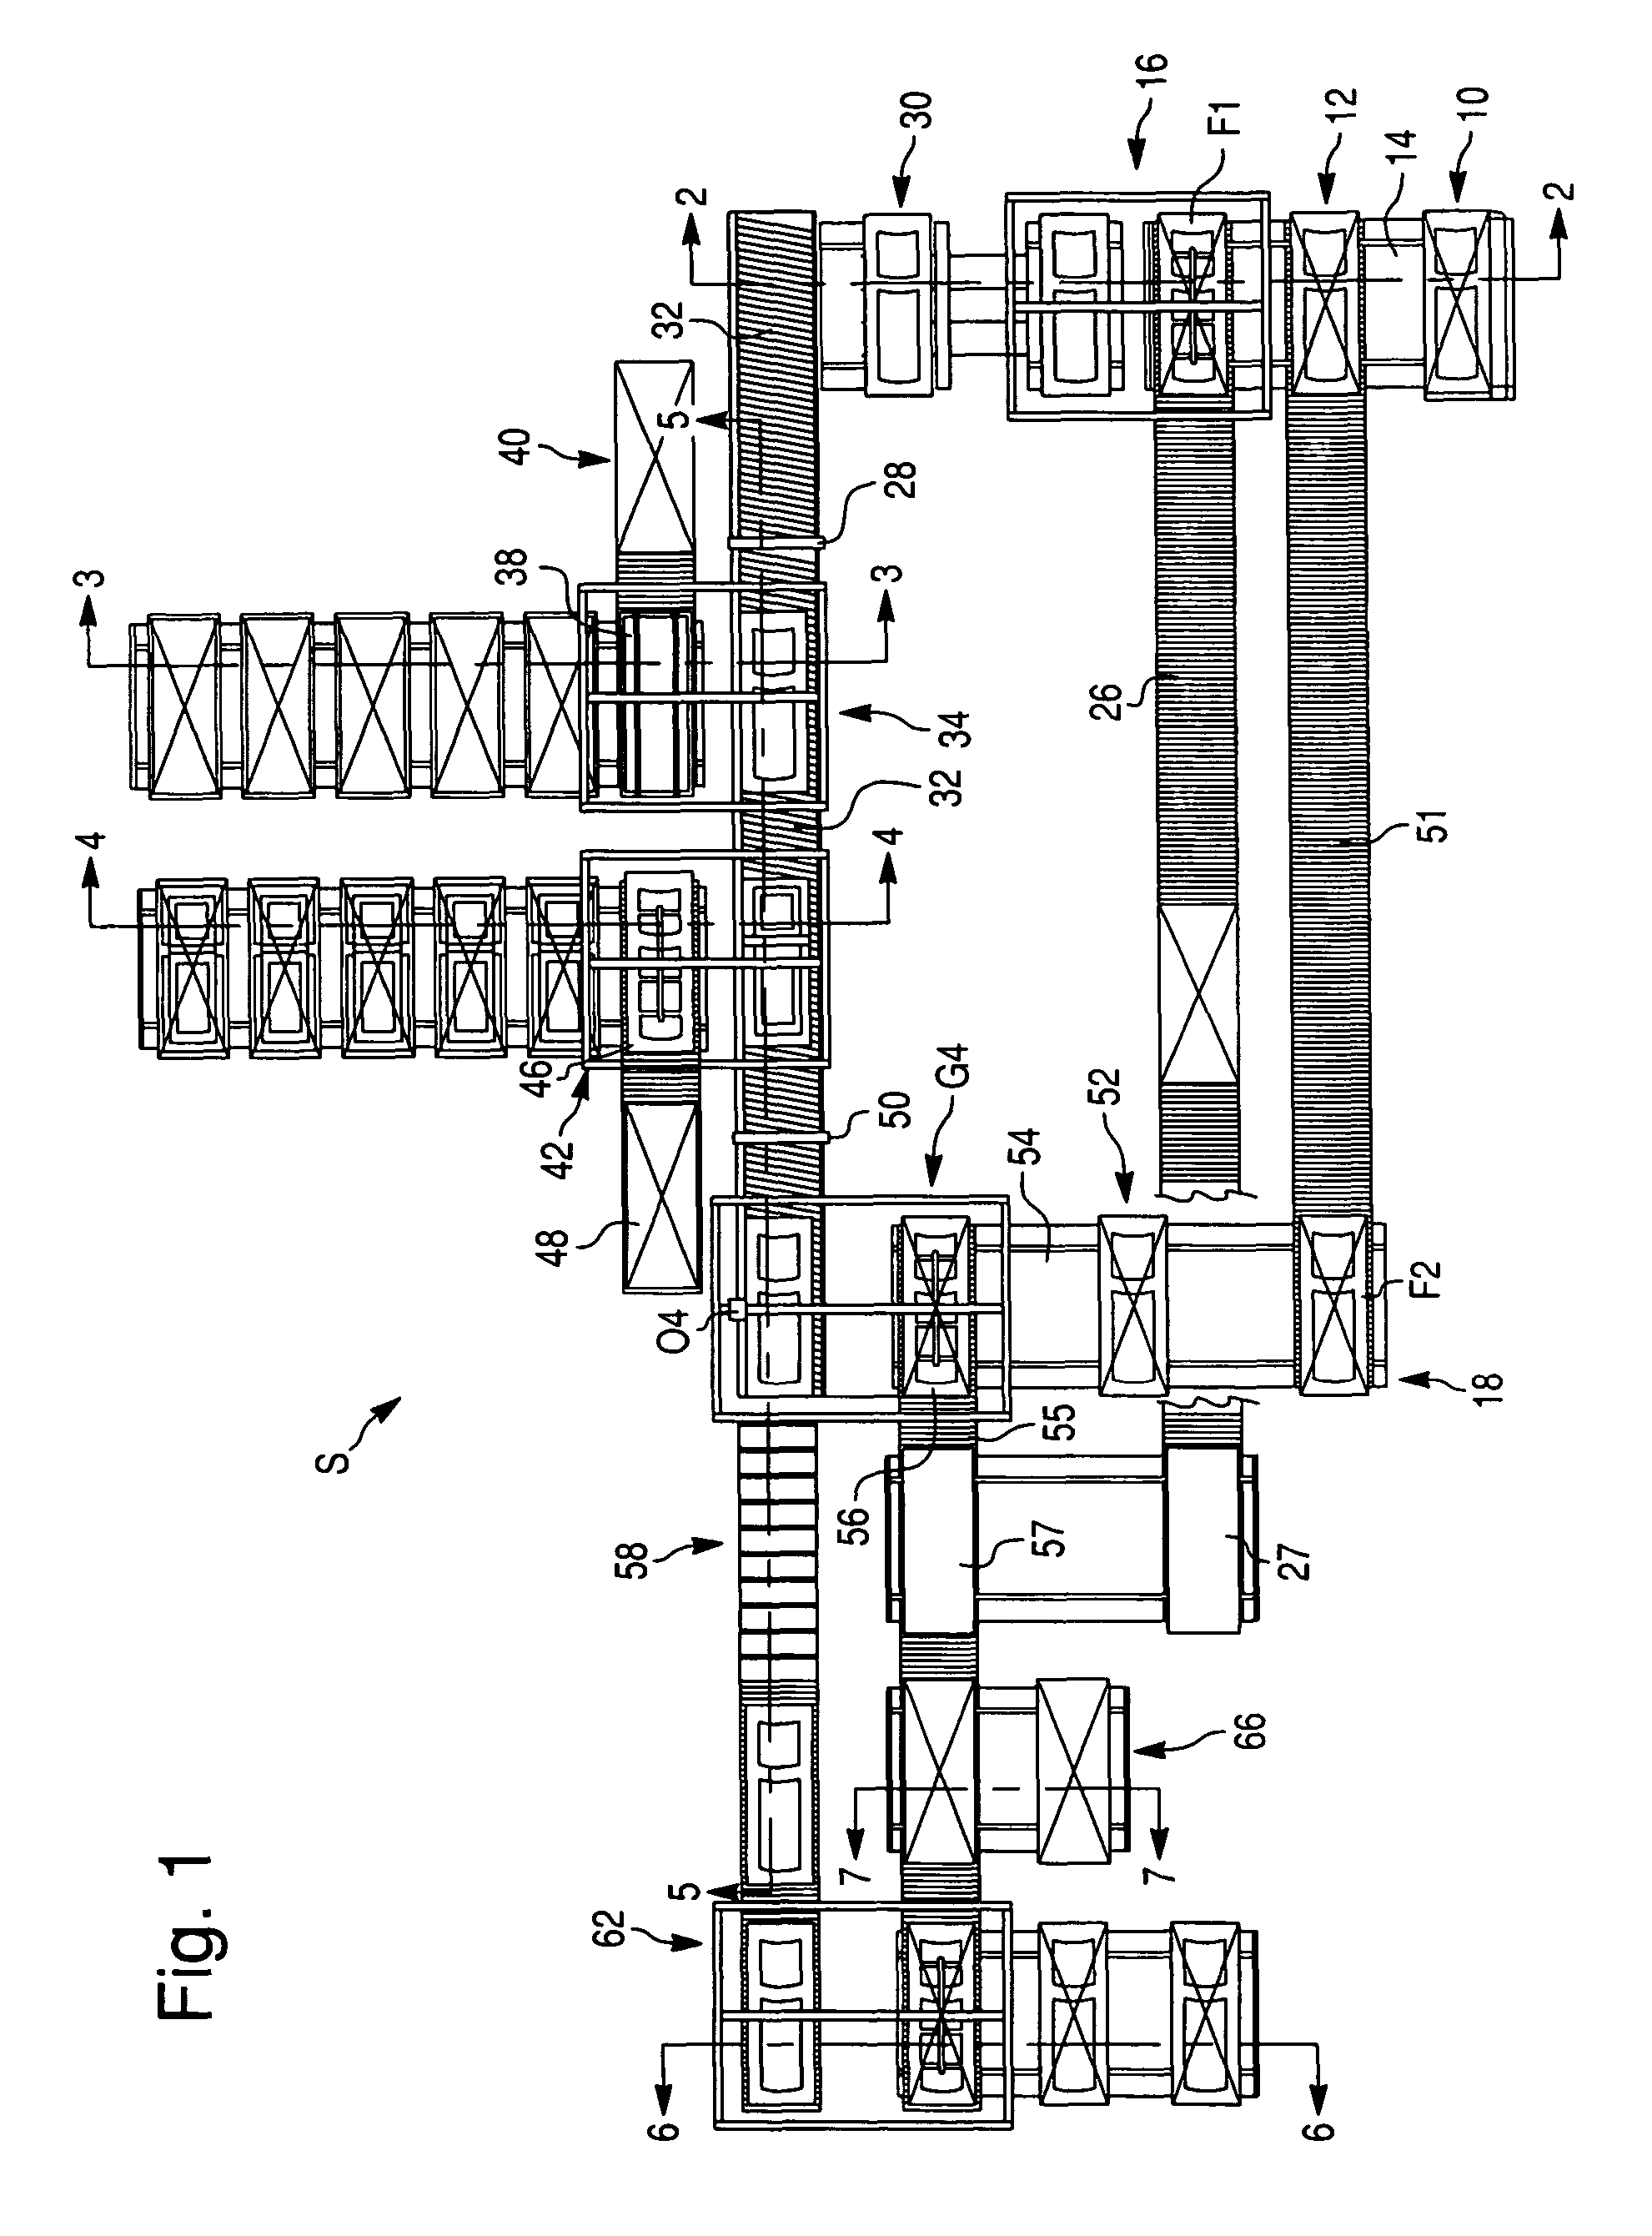 Automated door assembly system and method